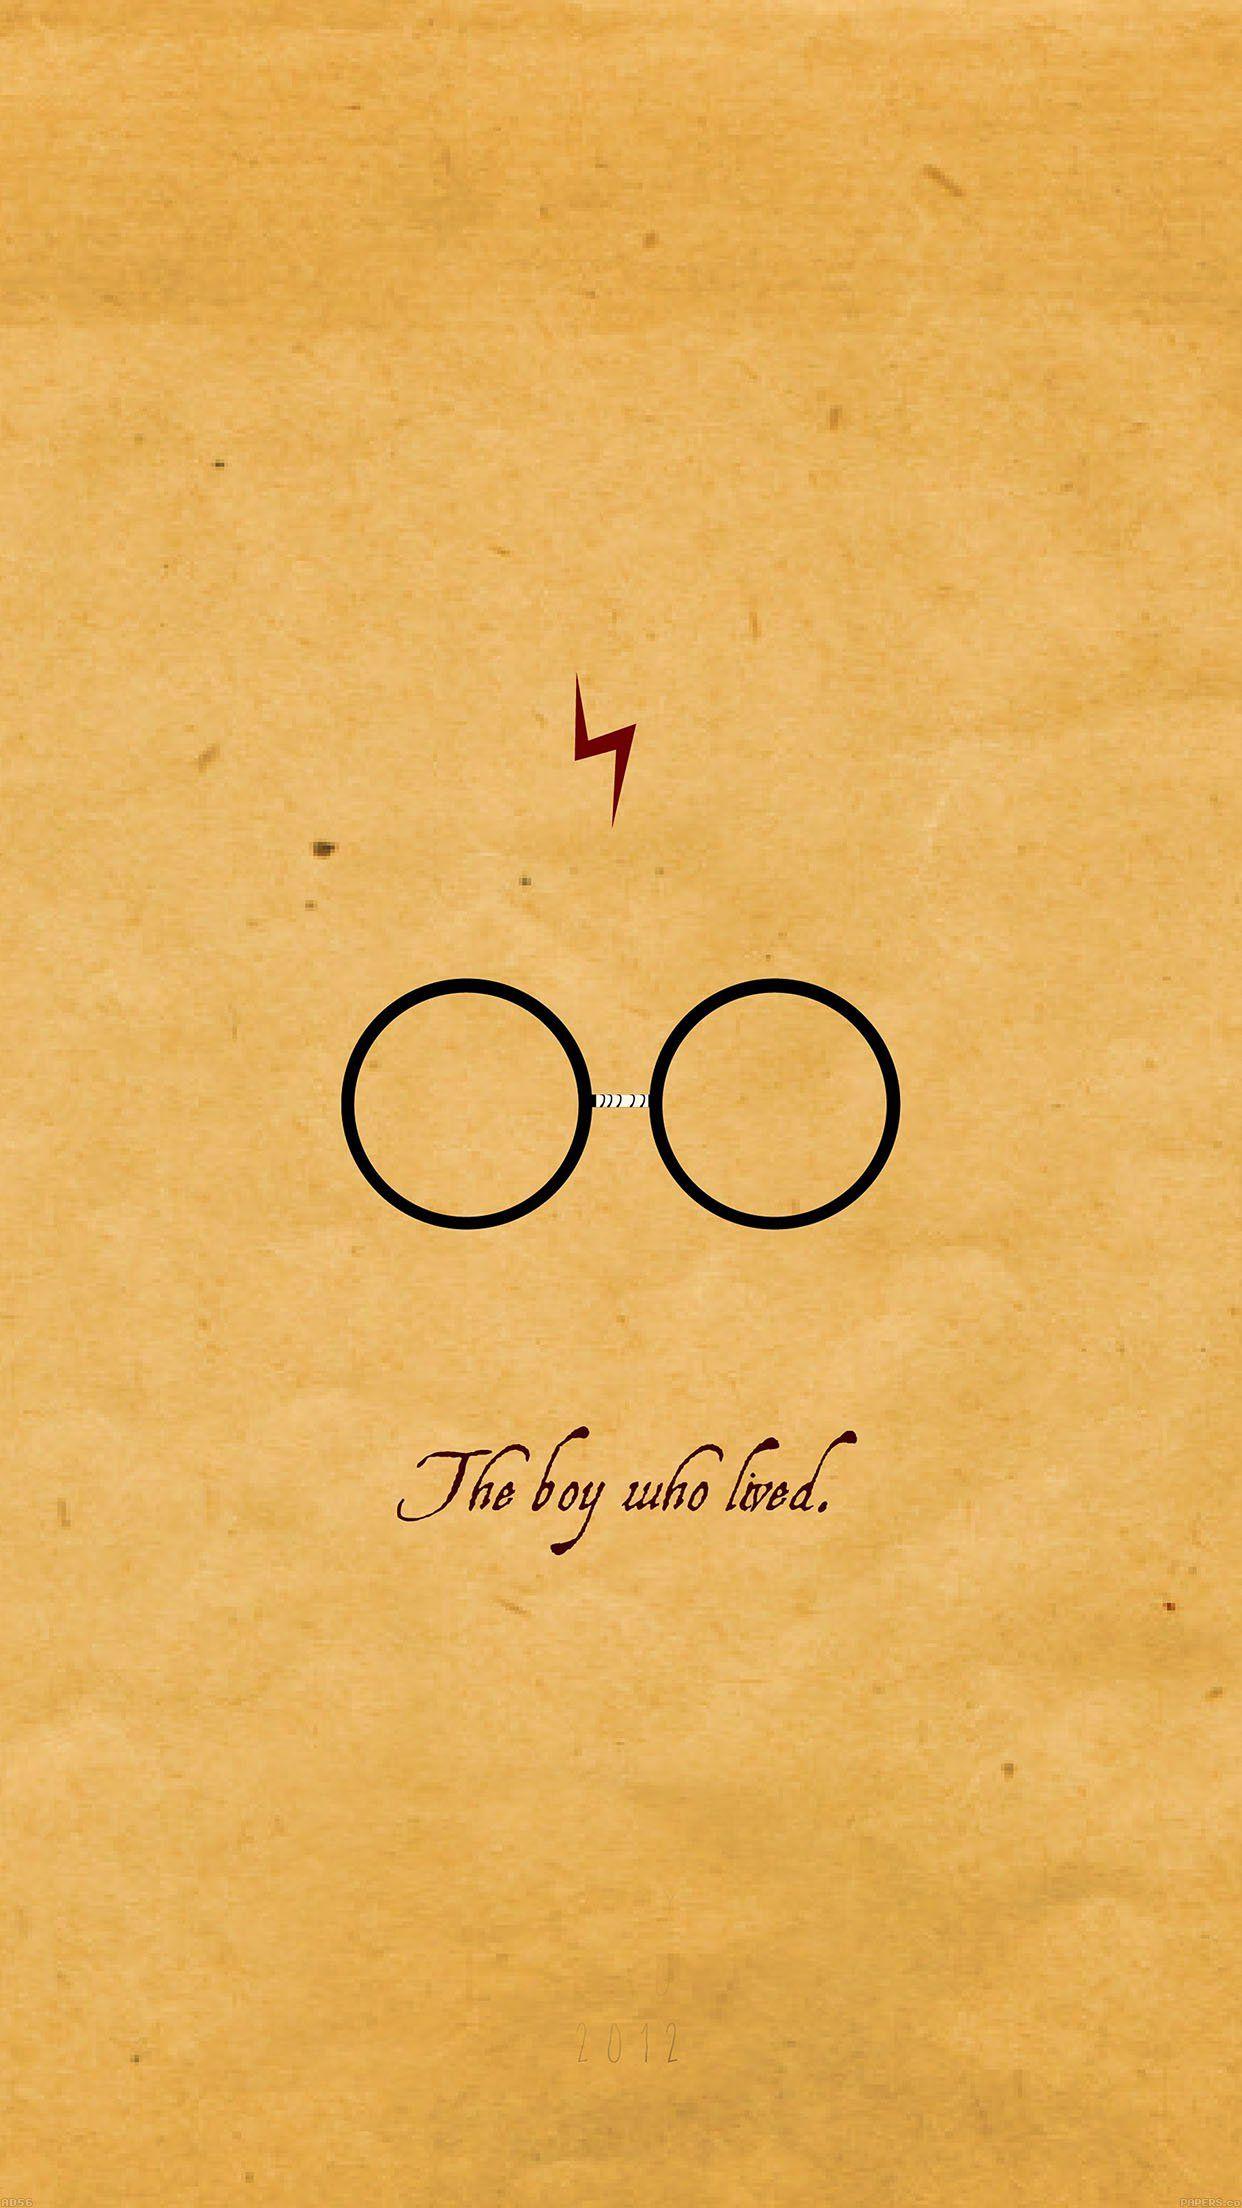 Harry Potter Wallpapers  Top 37 Best Harry Potter Wallpapers  HQ 